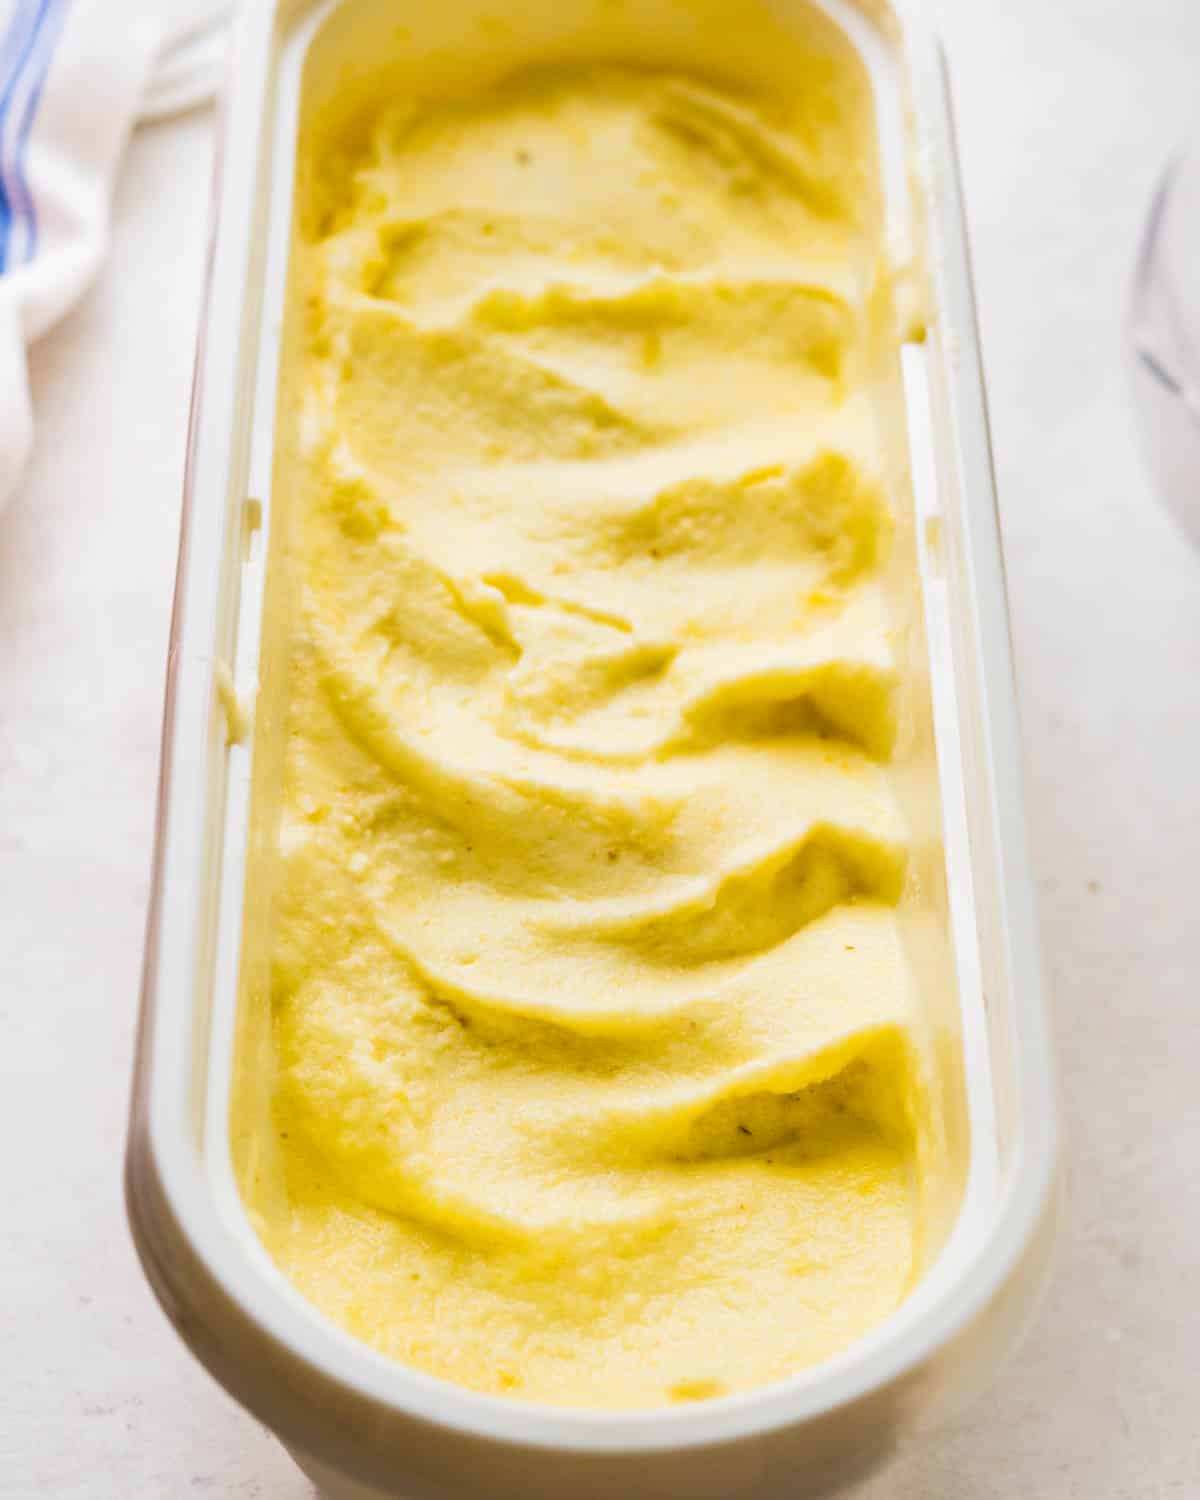 A container filled with homemade pineapple sorbet.